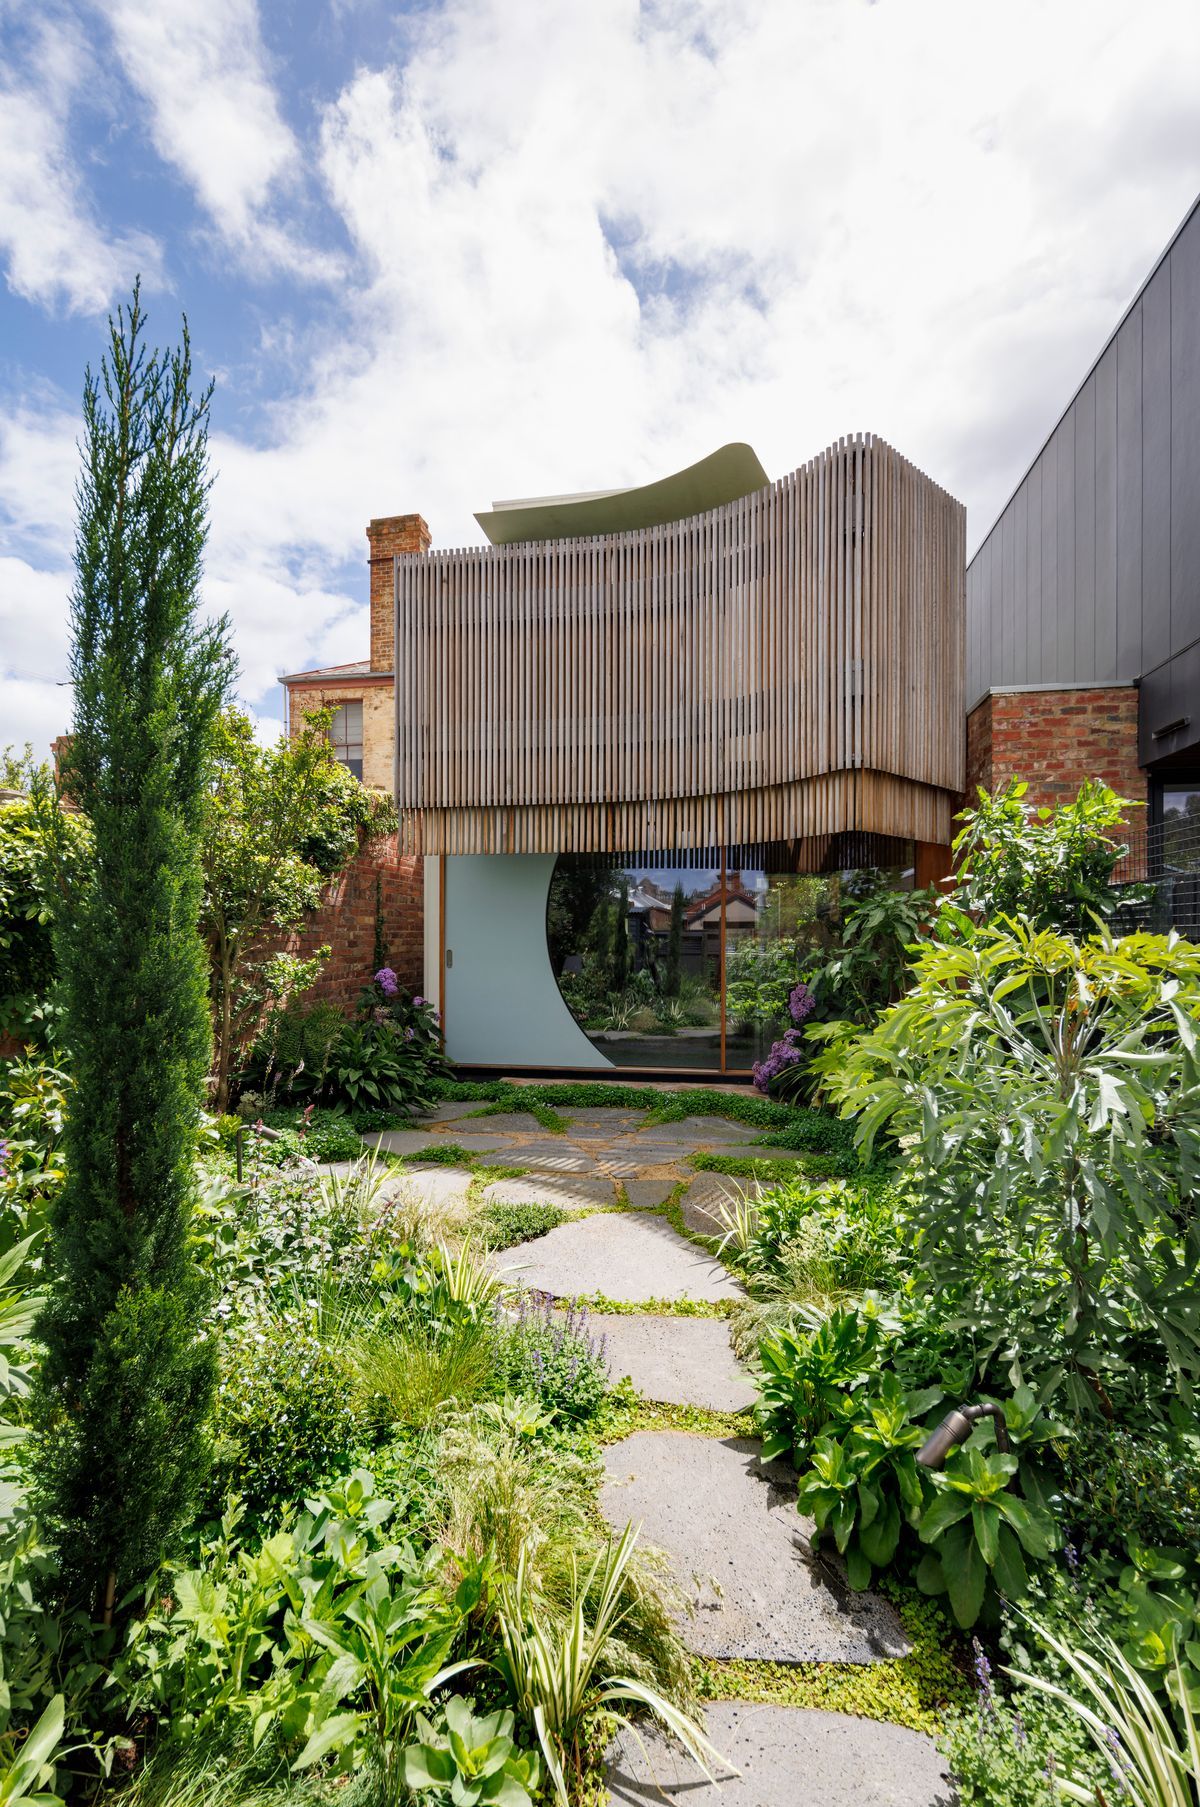 Tiara House by FMD Architects. Tiara house courtyard view